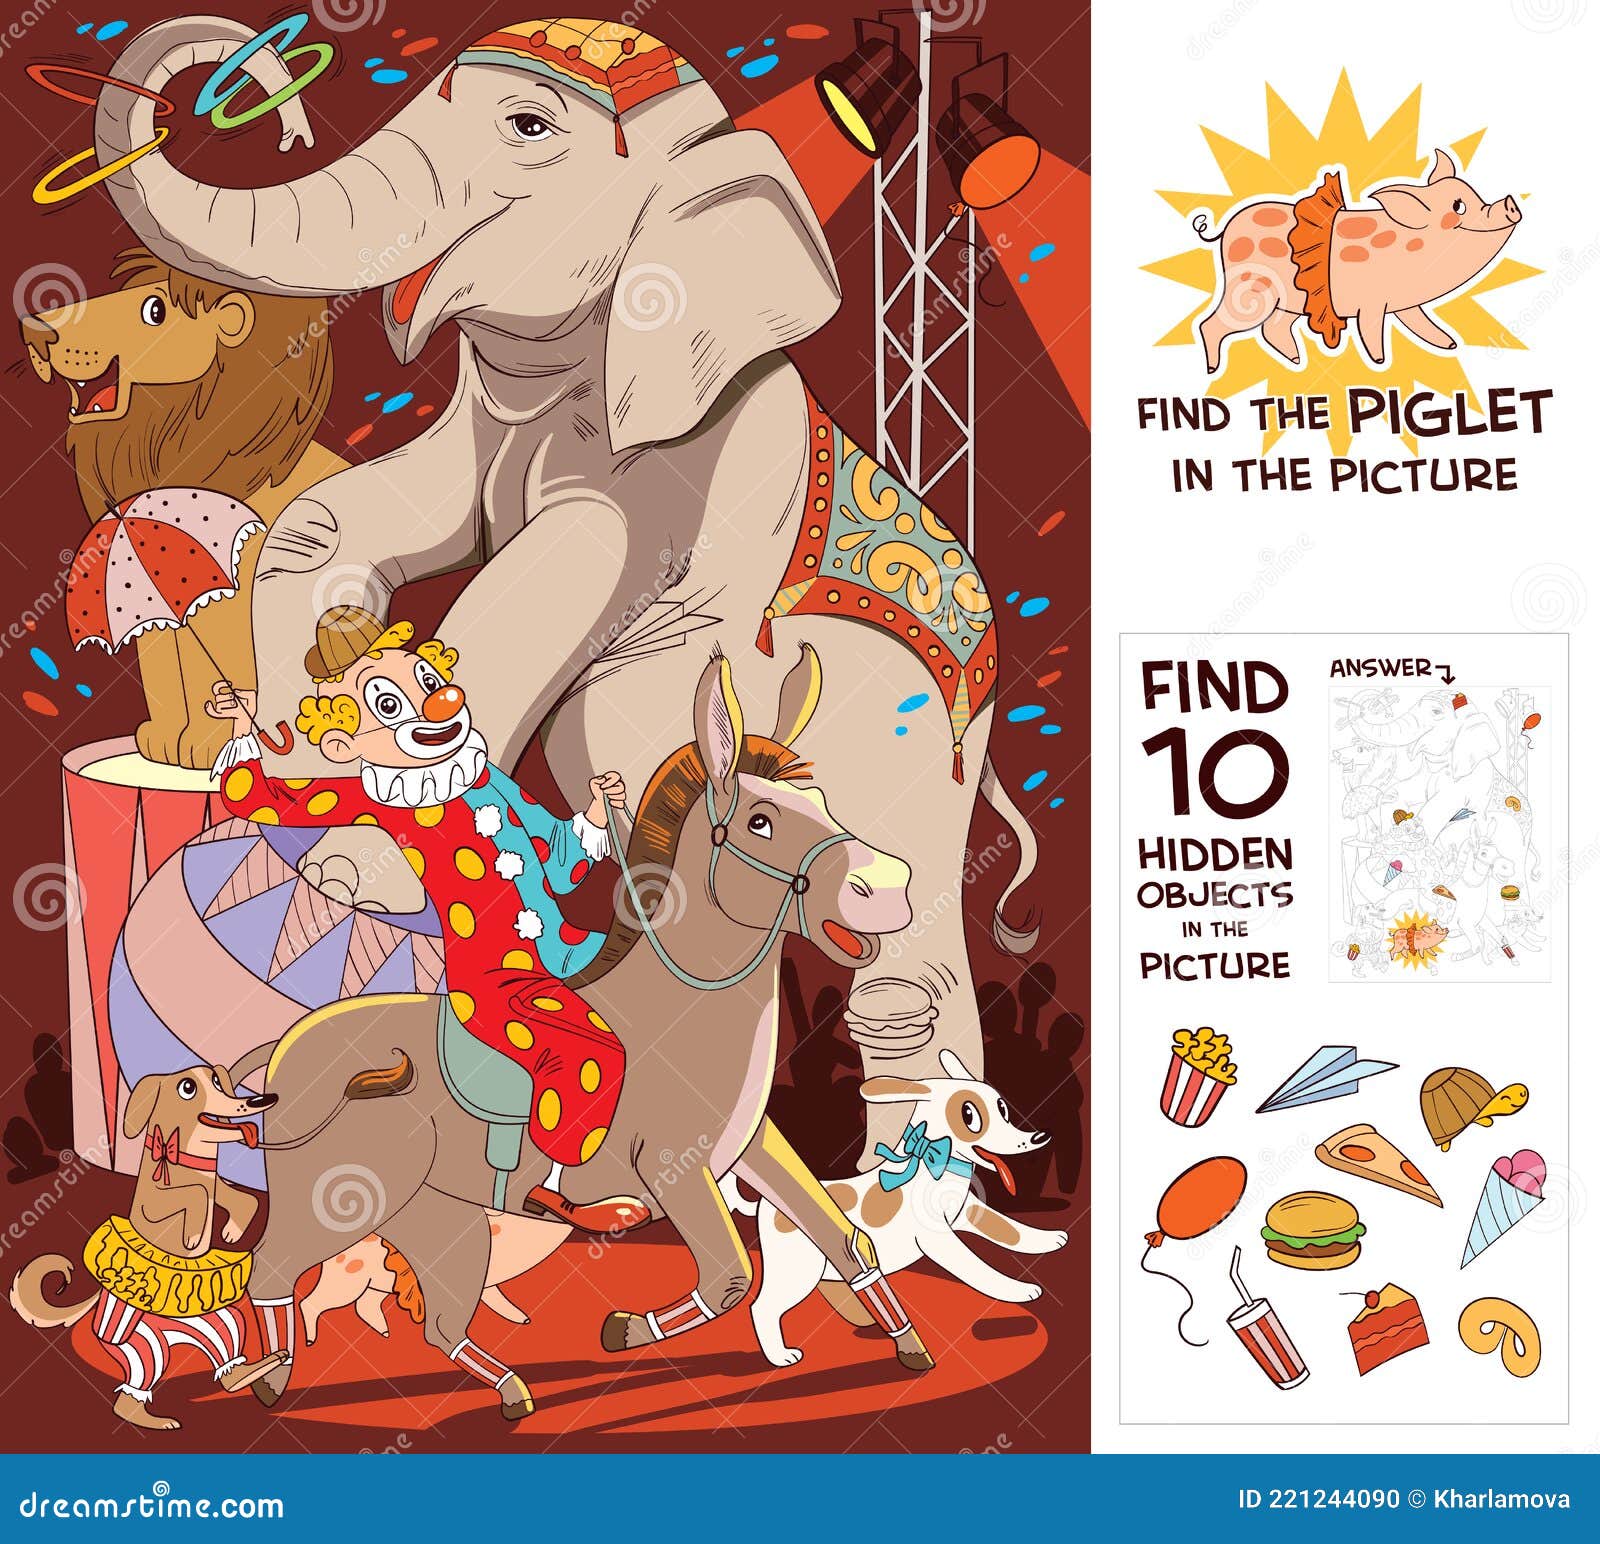 circus show with elephant, clown, dog, lion and donkey. find 10 hidden objects